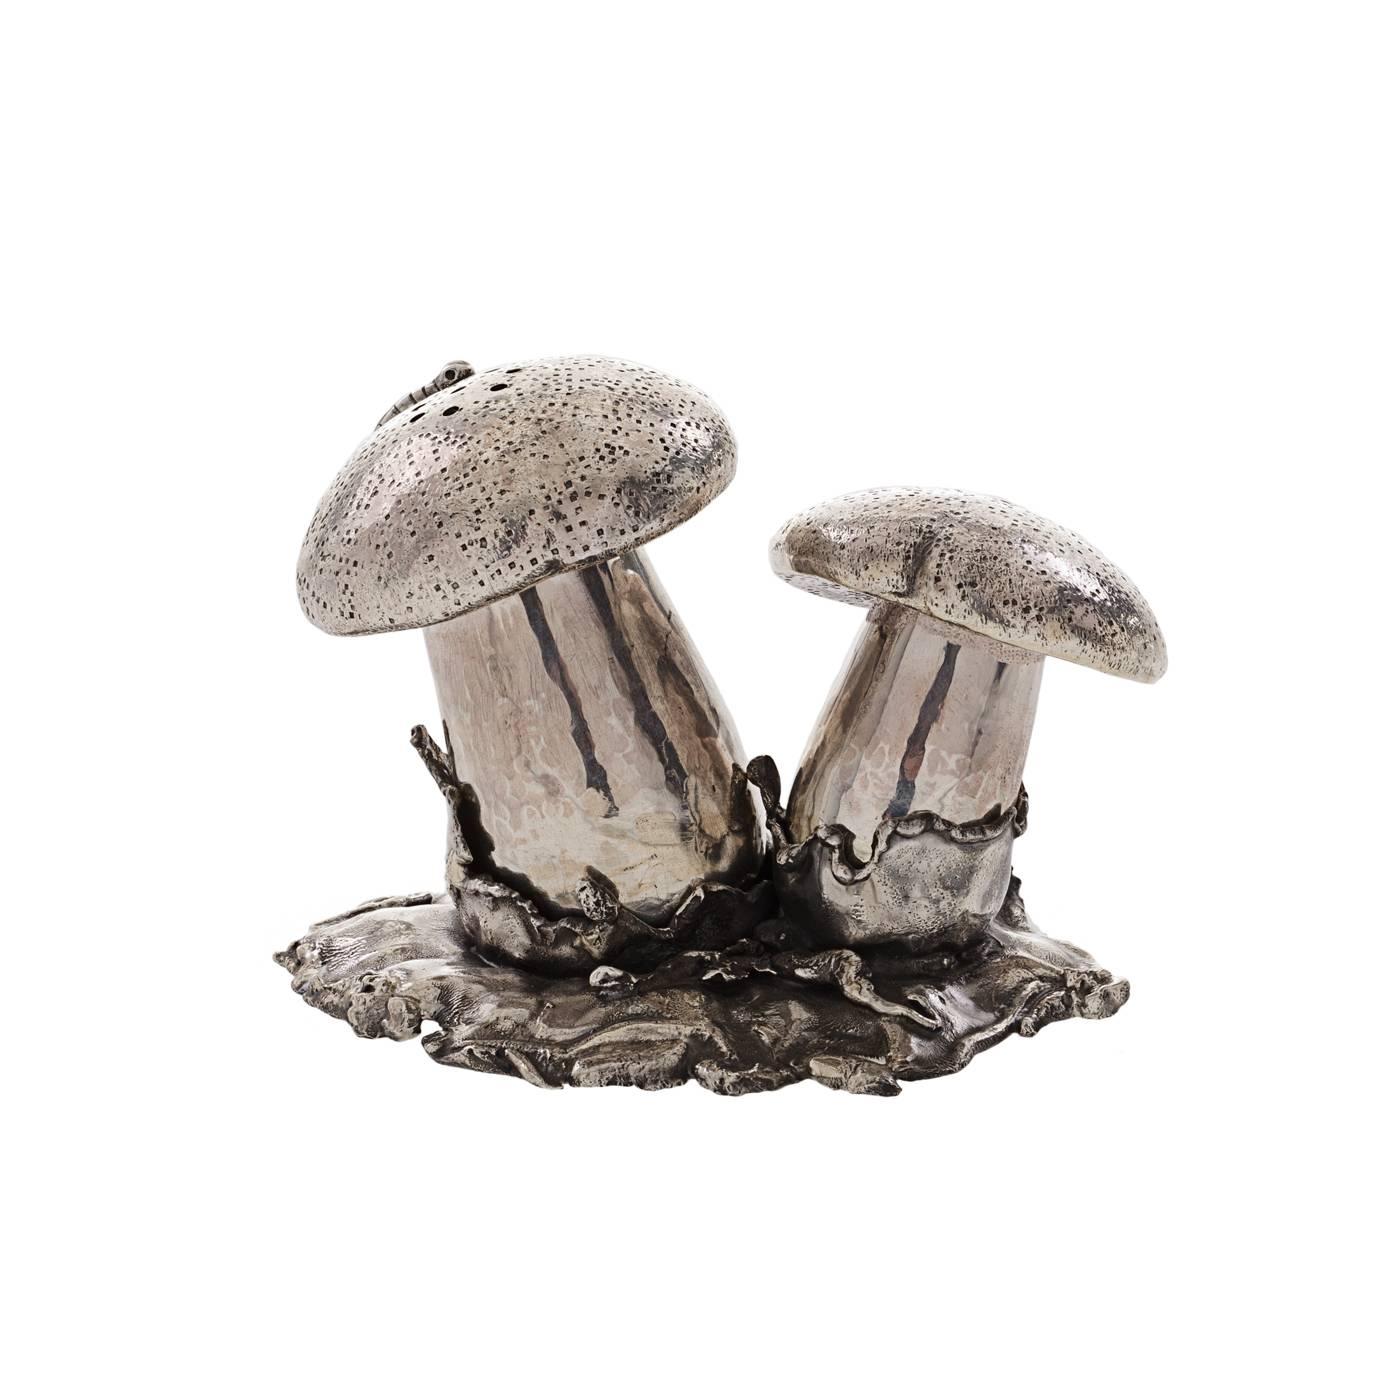 Sterling silver salt and pepper shakers shaped like two wild forest mushrooms. Entirely handcrafted by the expert Florentine silversmiths Lisi Brothers, this tableware piece catches attention with its incredible realism and detailing, as well as the